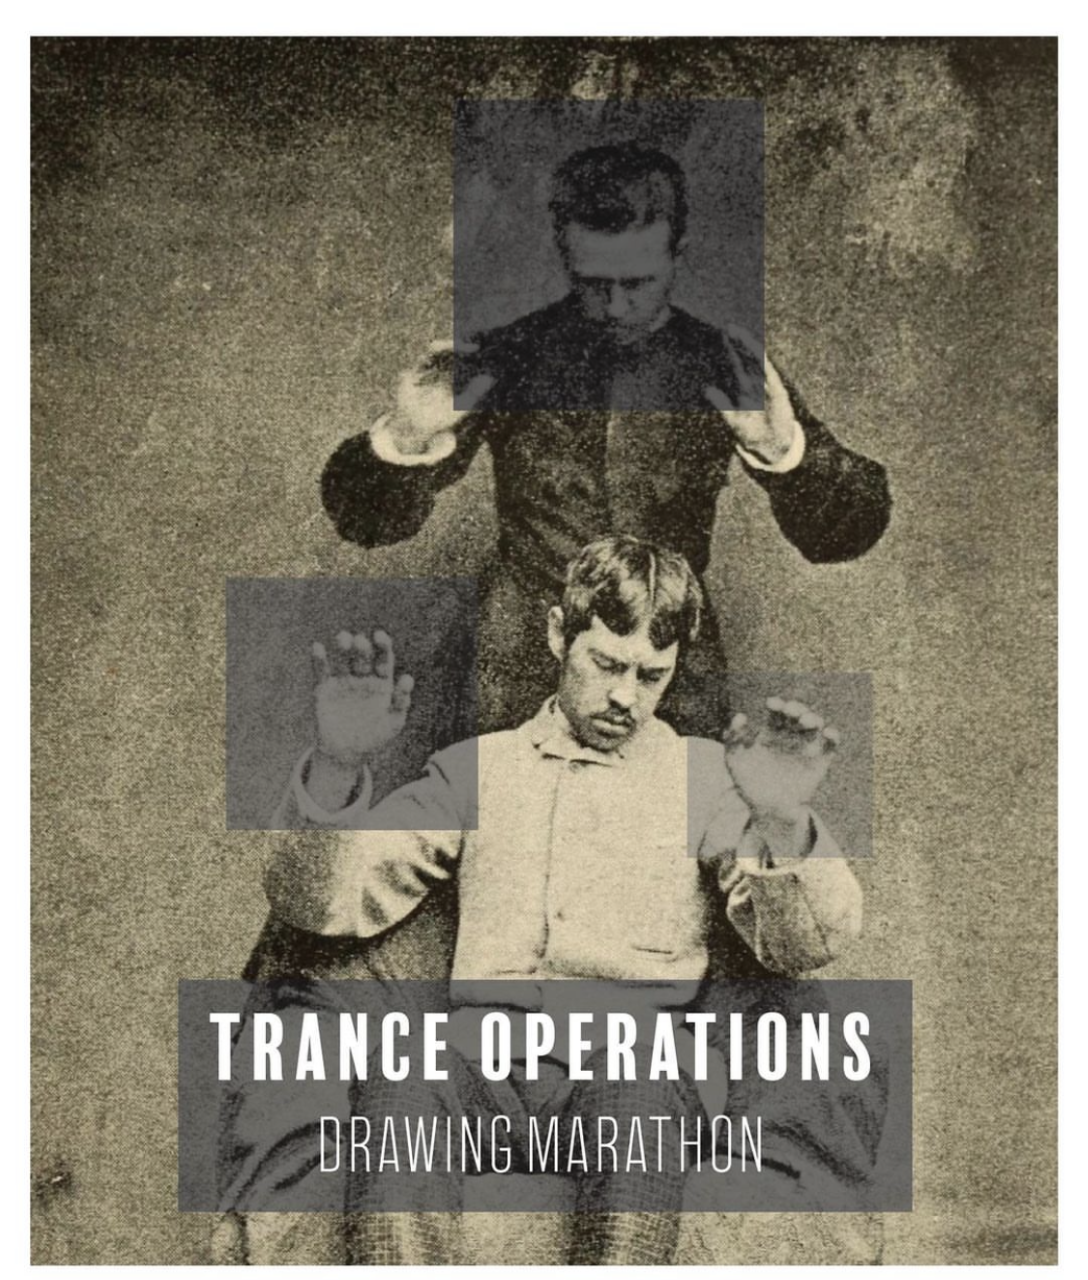 Poster by Craig Dongoski advertising his Spring 2023 lecture at the Lamar Dodd School of Art, "TRANCE OPERATIONS: DRAWING MARATHON," which shared the inspiration behind MYSTERIUM. March 21, 2023.